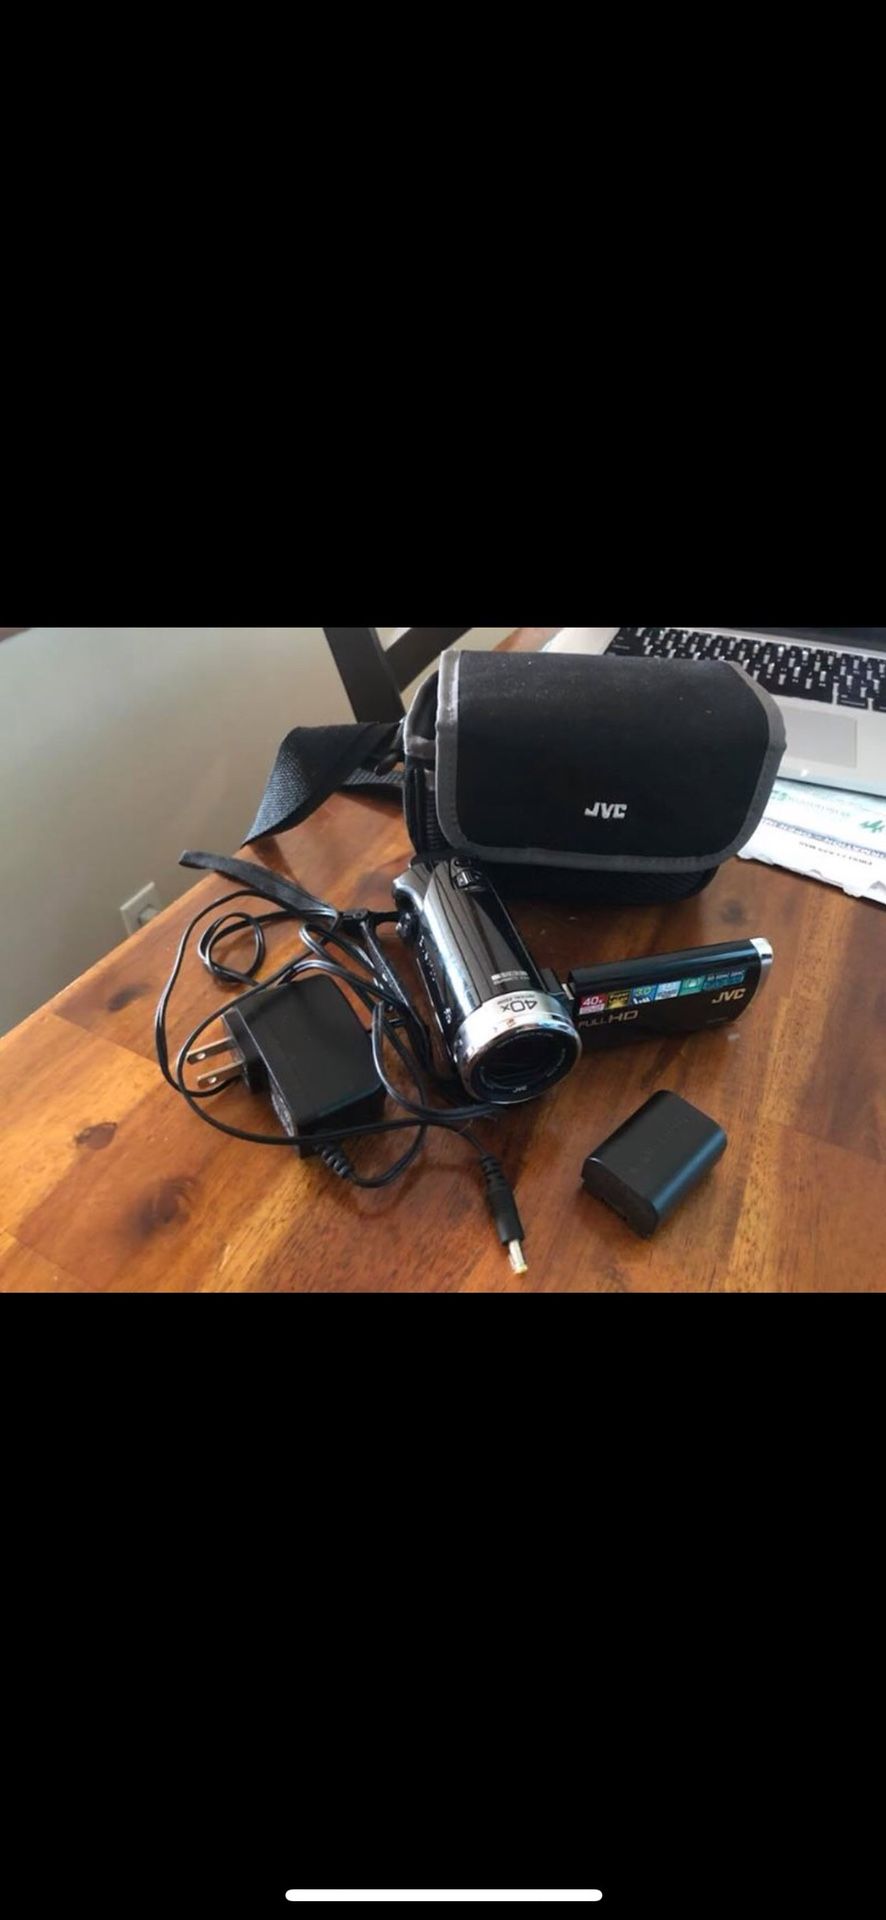 JVC Everio Camcorder with Accessories